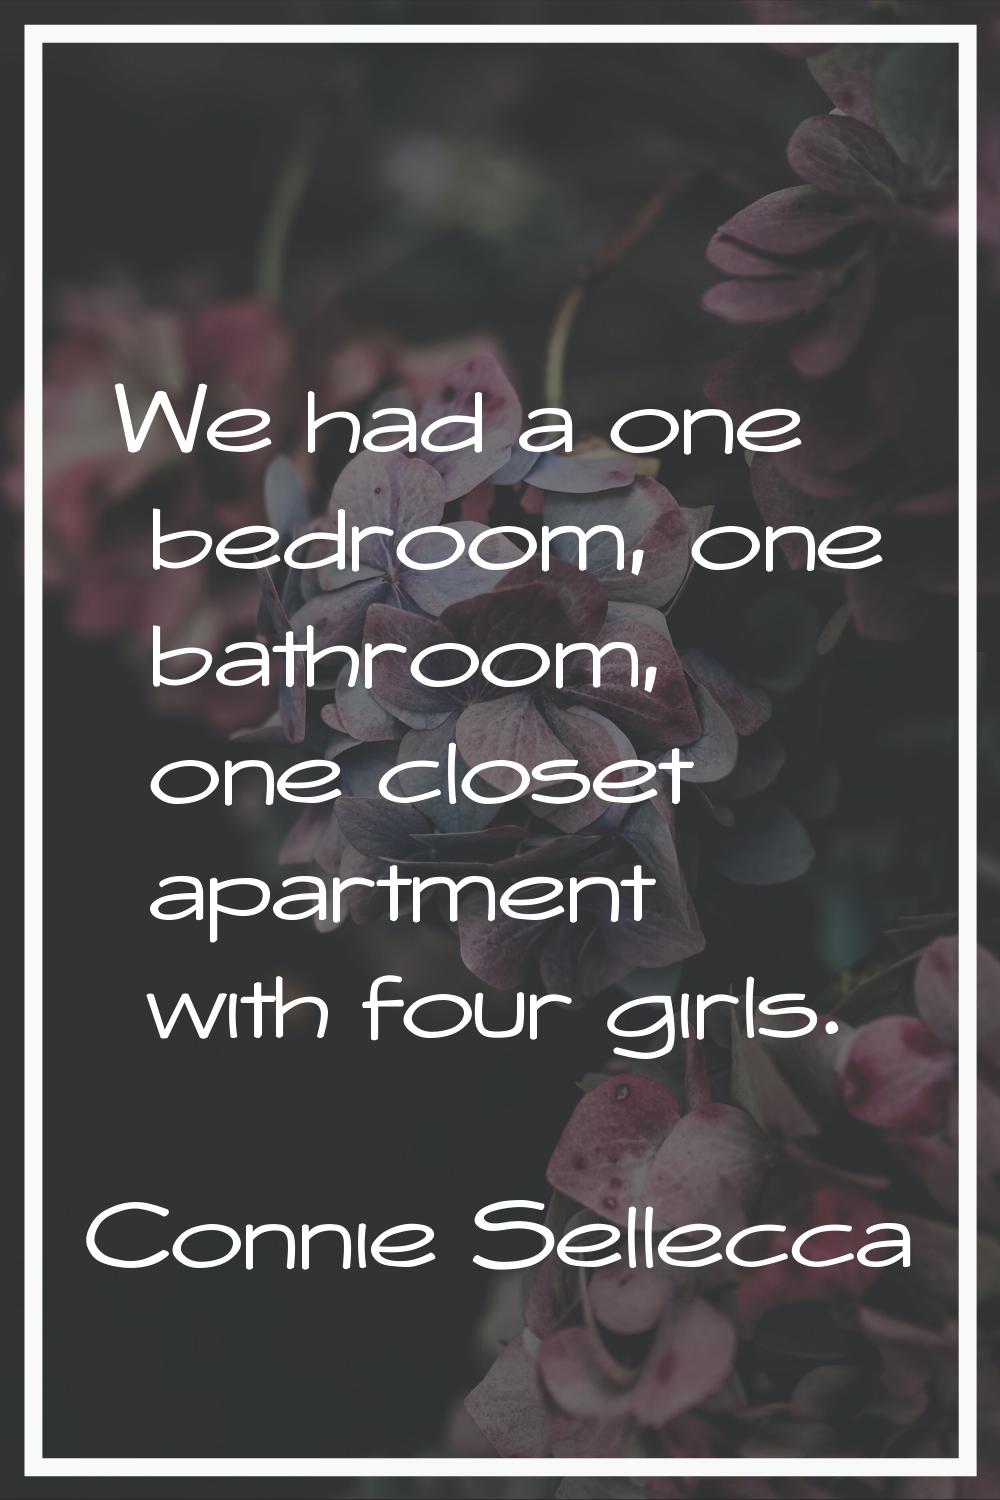 We had a one bedroom, one bathroom, one closet apartment with four girls.